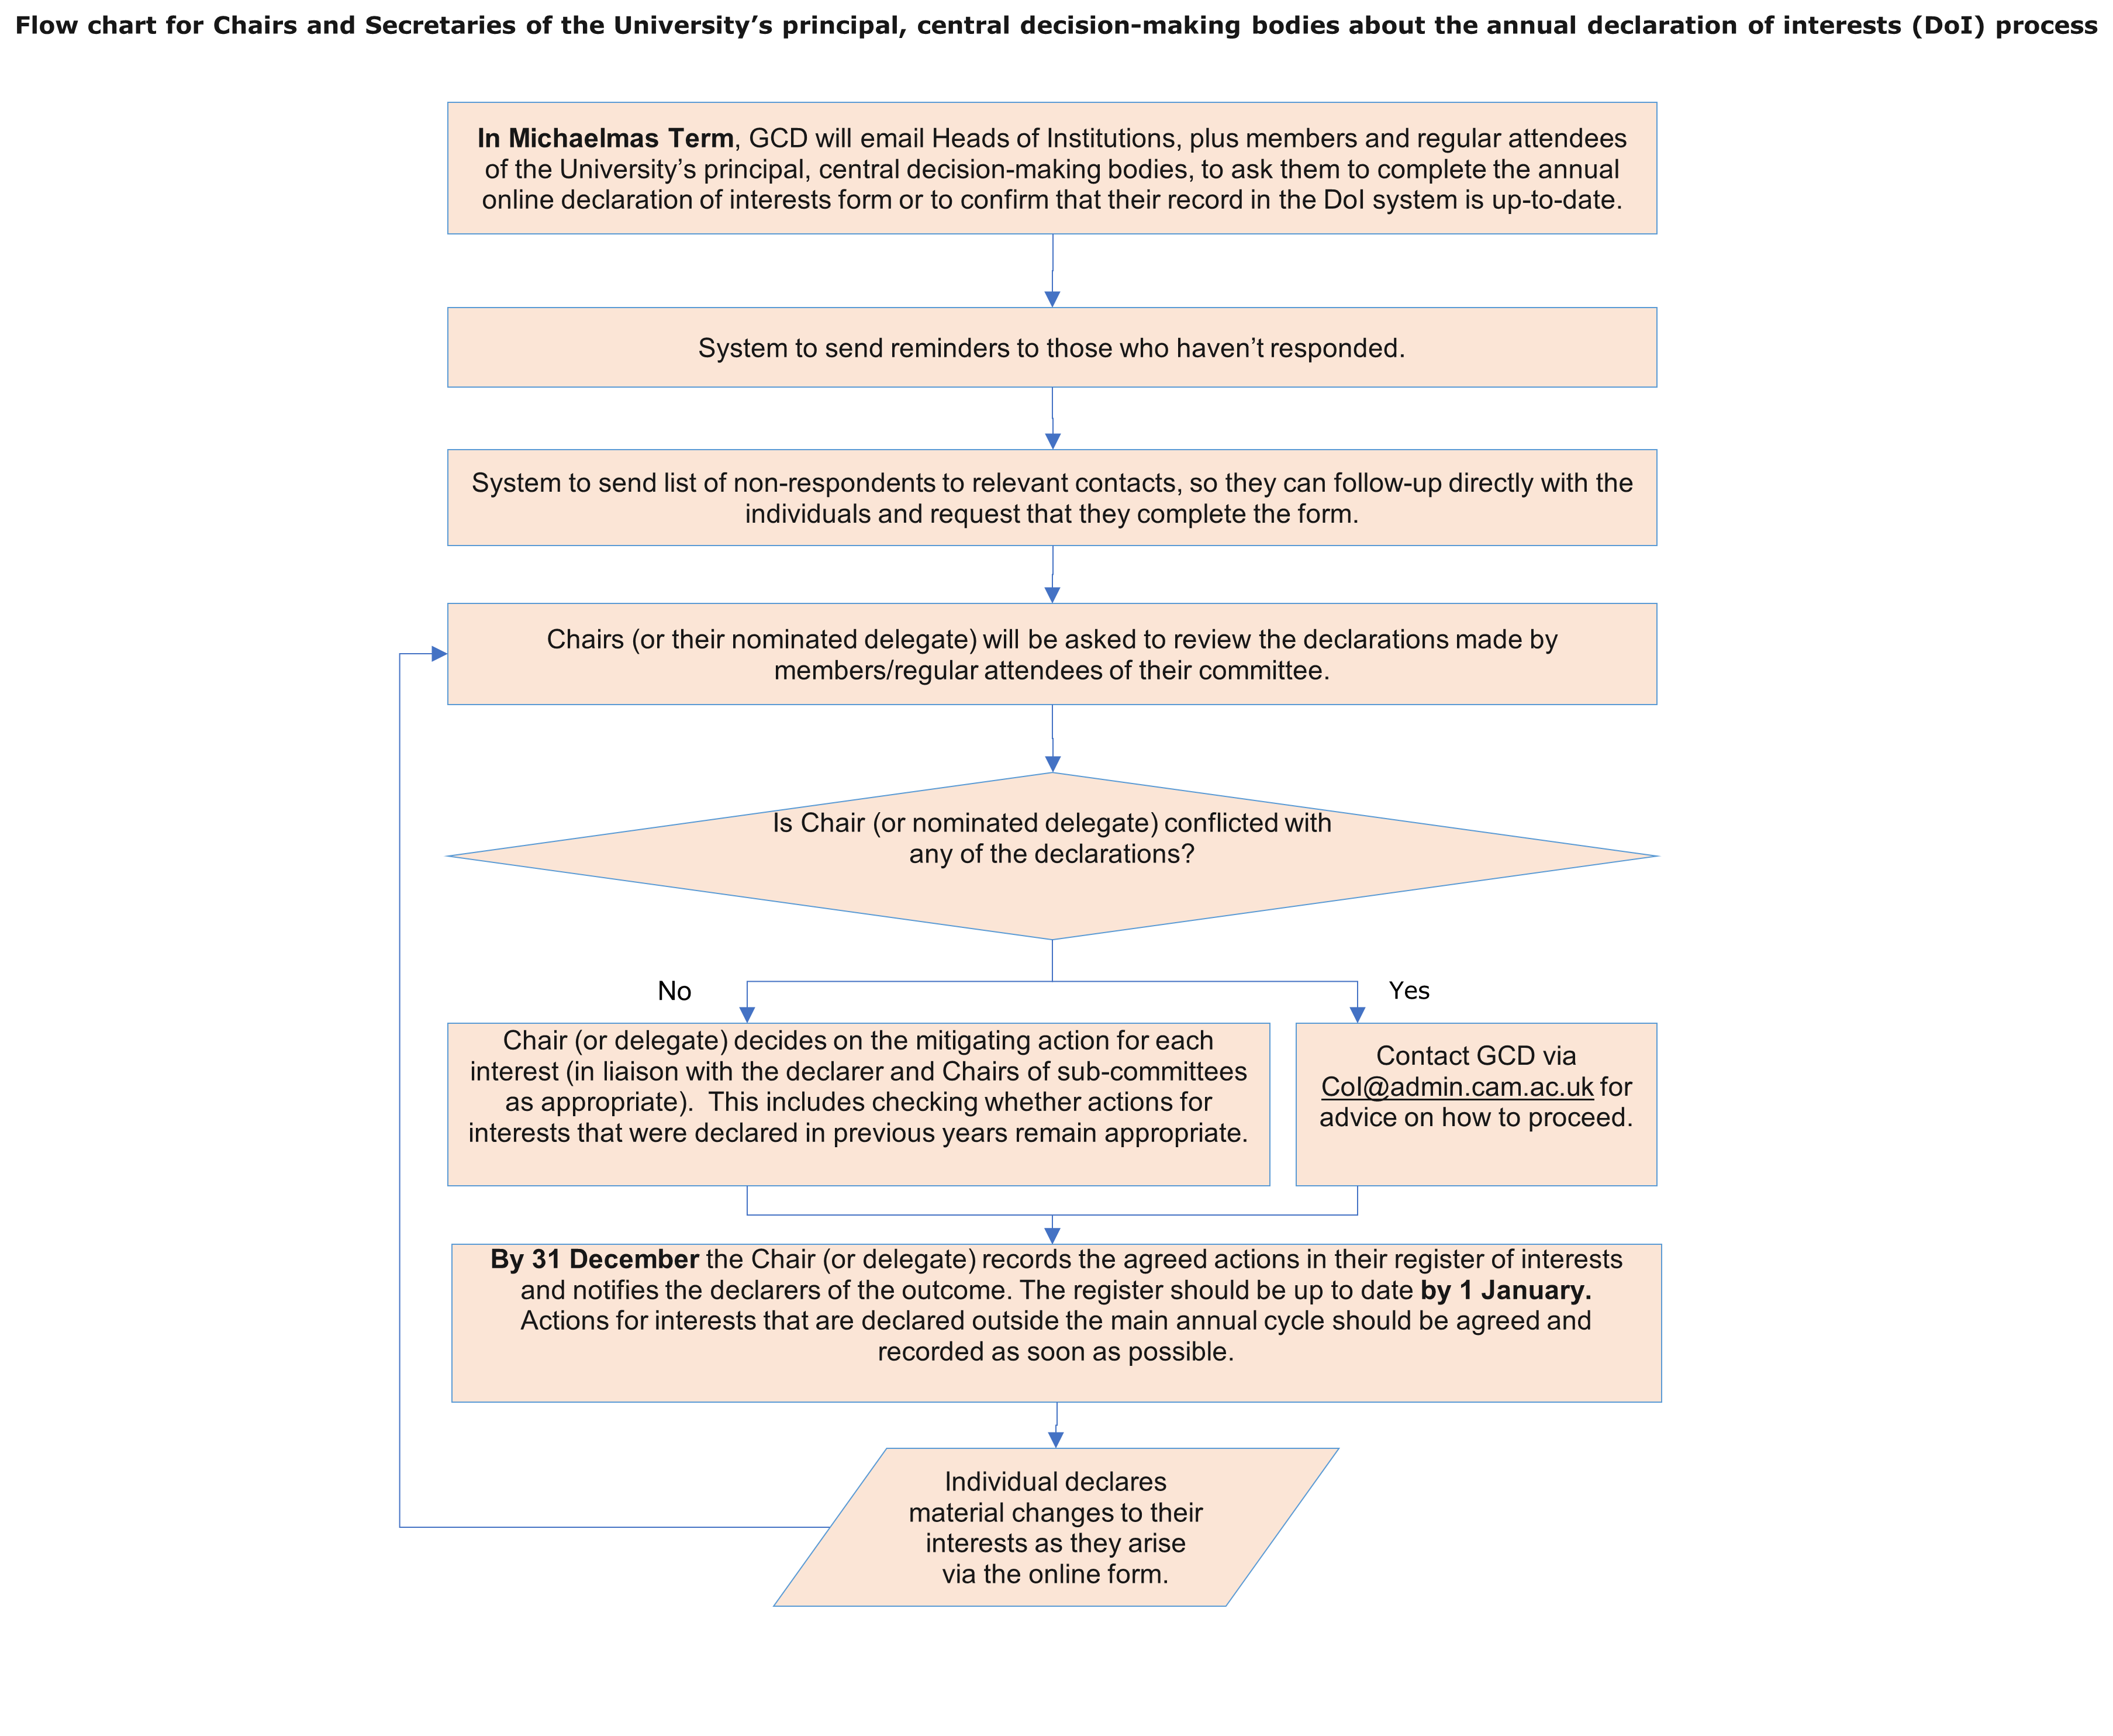 Flow chart for Chairs and Secretaries of the principal, central decision-making committees